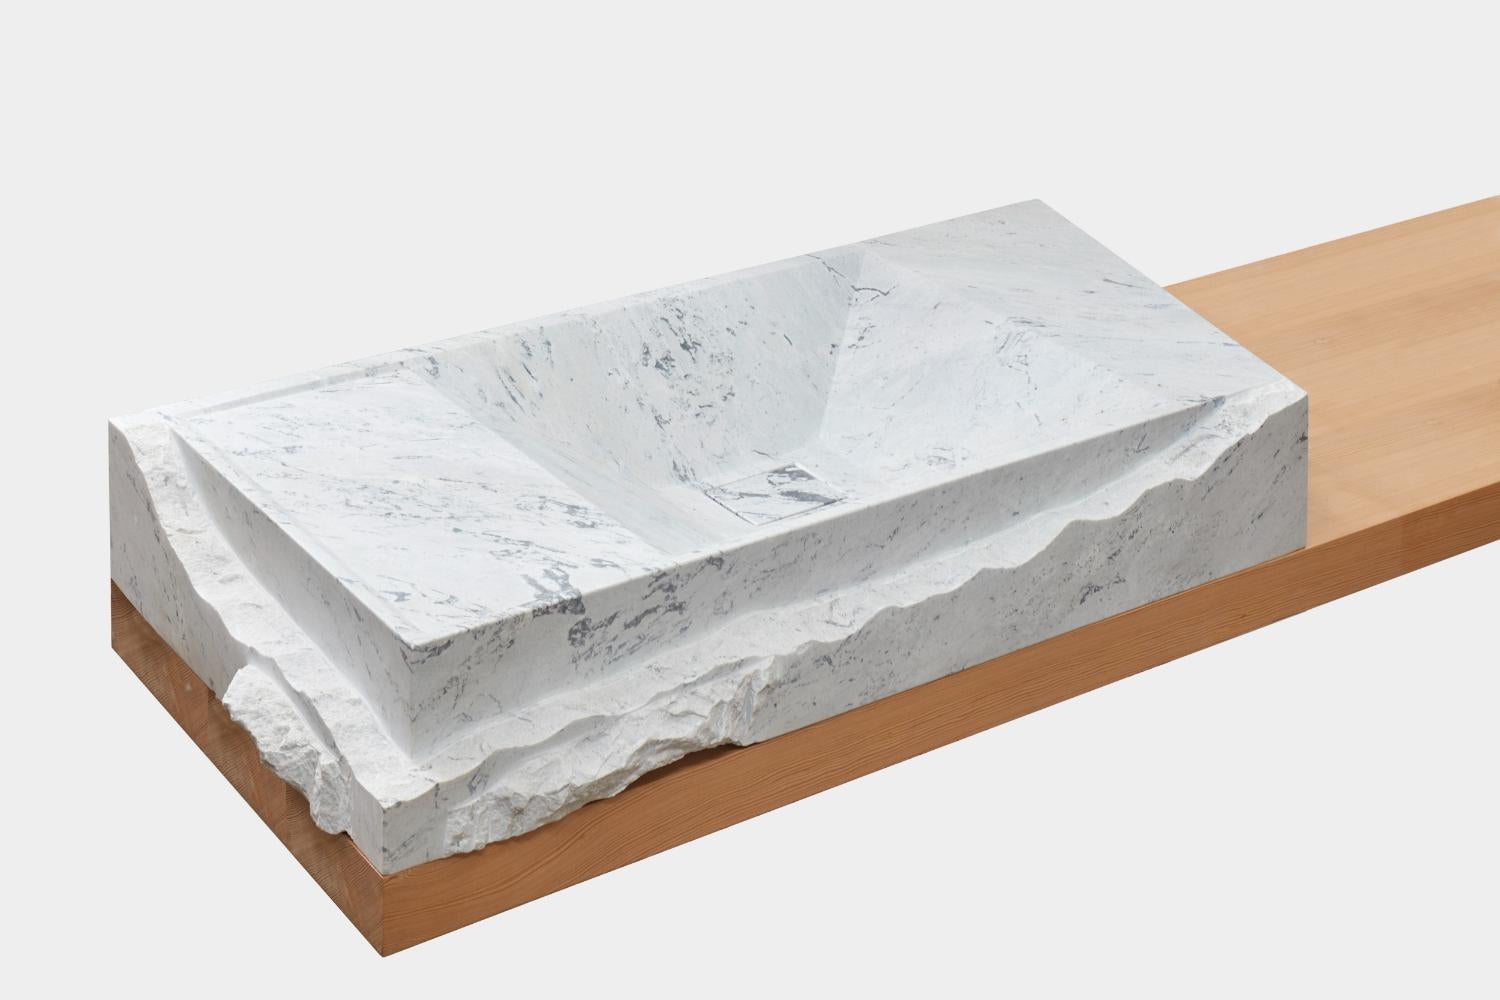 Hydrolytic N°2 by Estudio Rafael Freyre
Dimensions: W 120 D 60 x H 17 cm 
Materials: Andes marble.

The cultures that inhabited our territory developed the cult of water, creating a society and urban spaces articulated with this fundamental